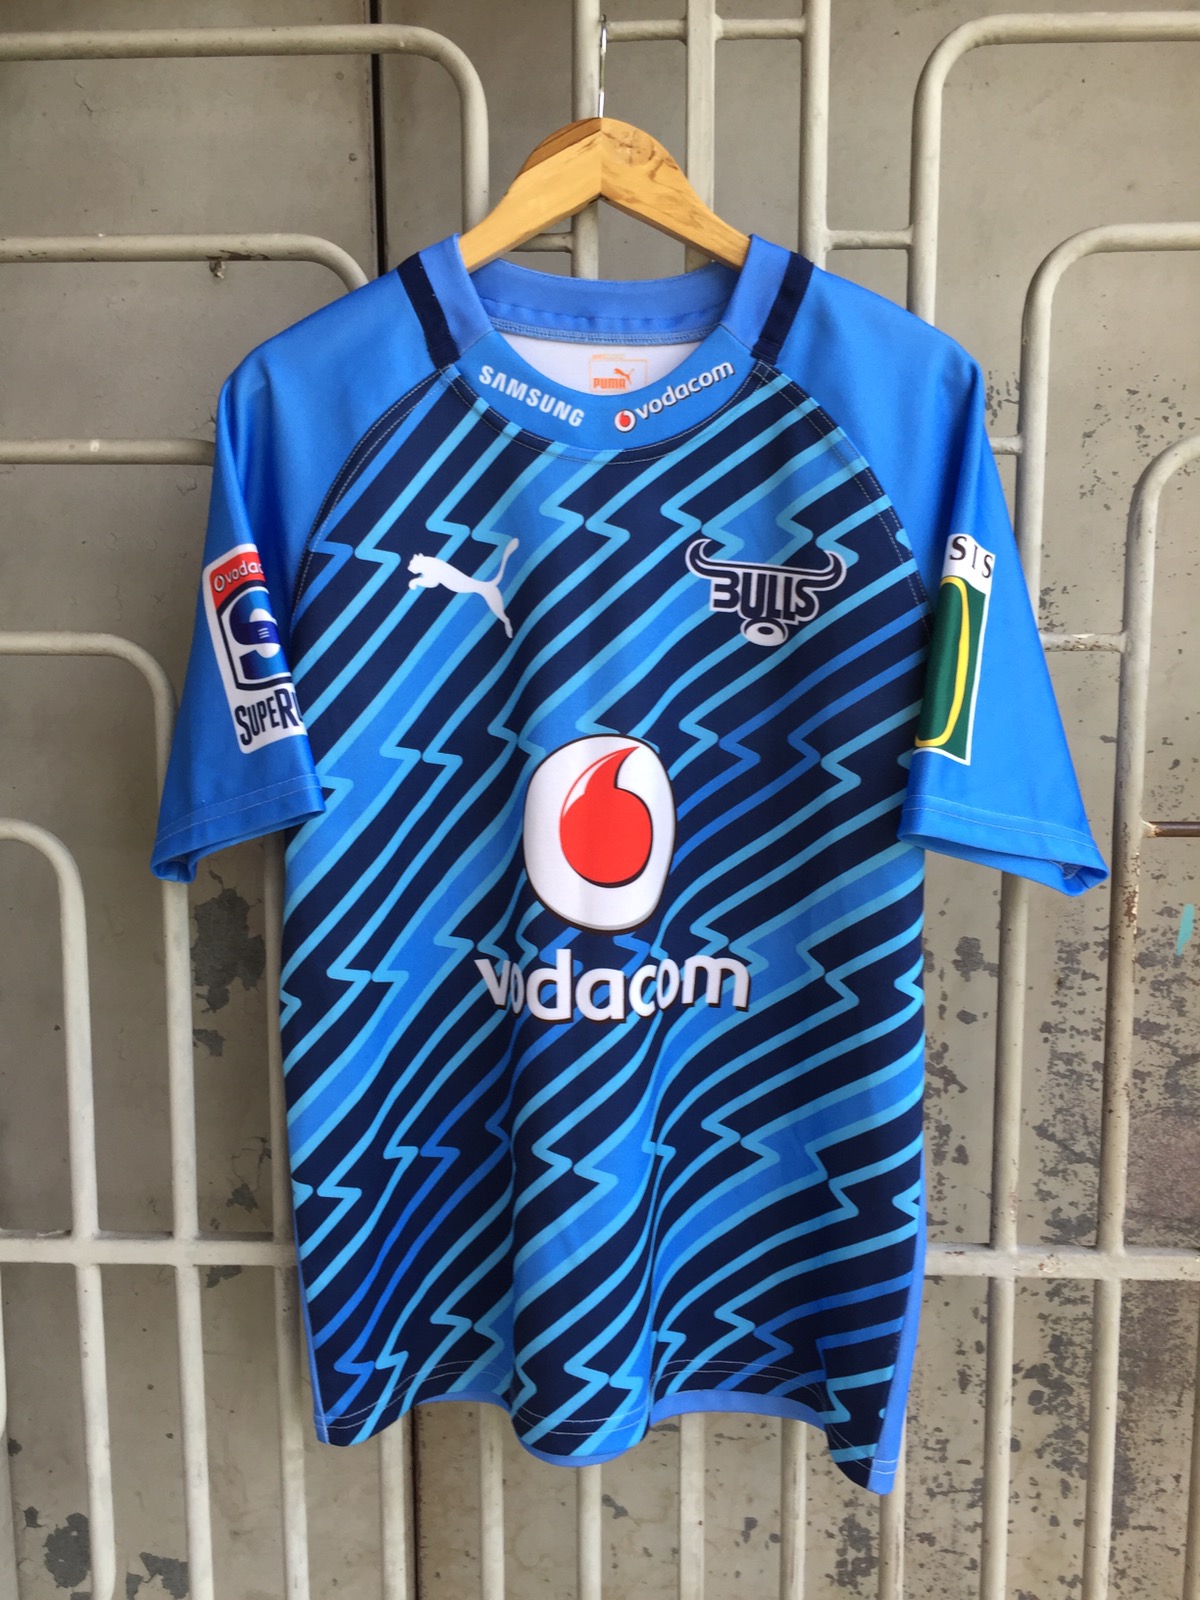 Rugby South Africa Club Jersey - 1